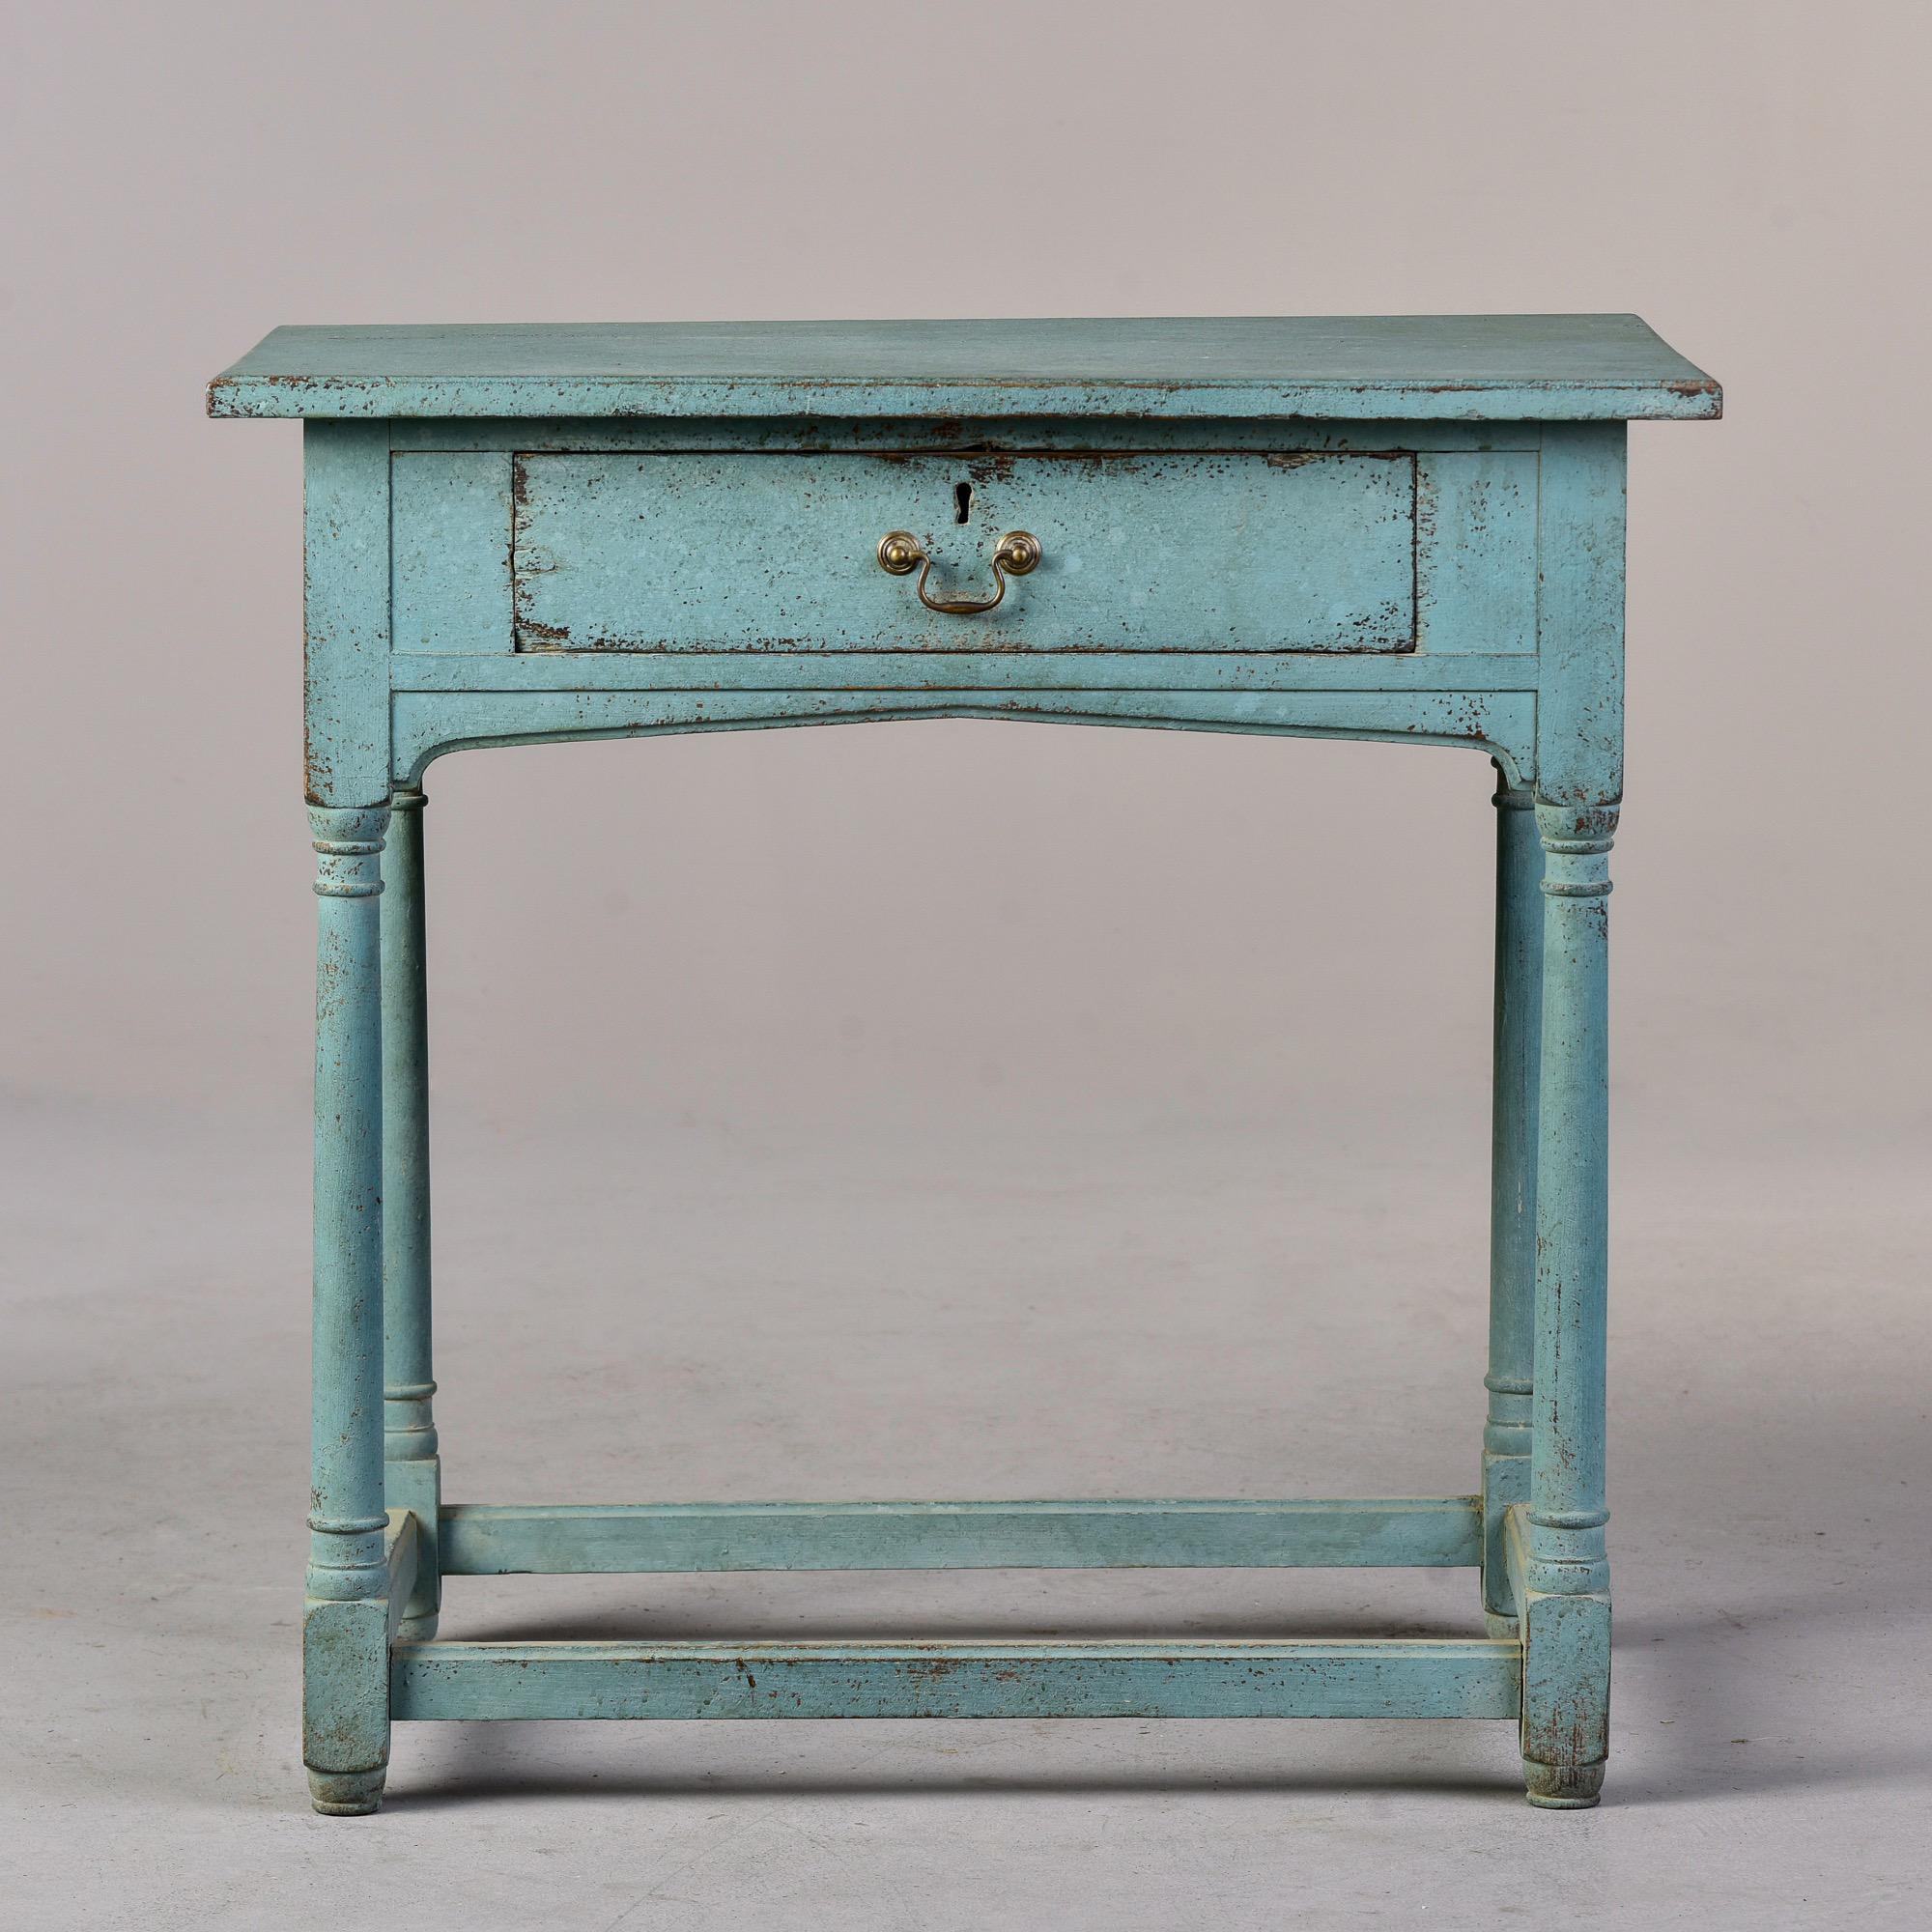 Circa 1780s small English side table with single drawer and robin’s egg blue painted finish. Drawer has locking hardware but no key found with this piece. Unknown maker.